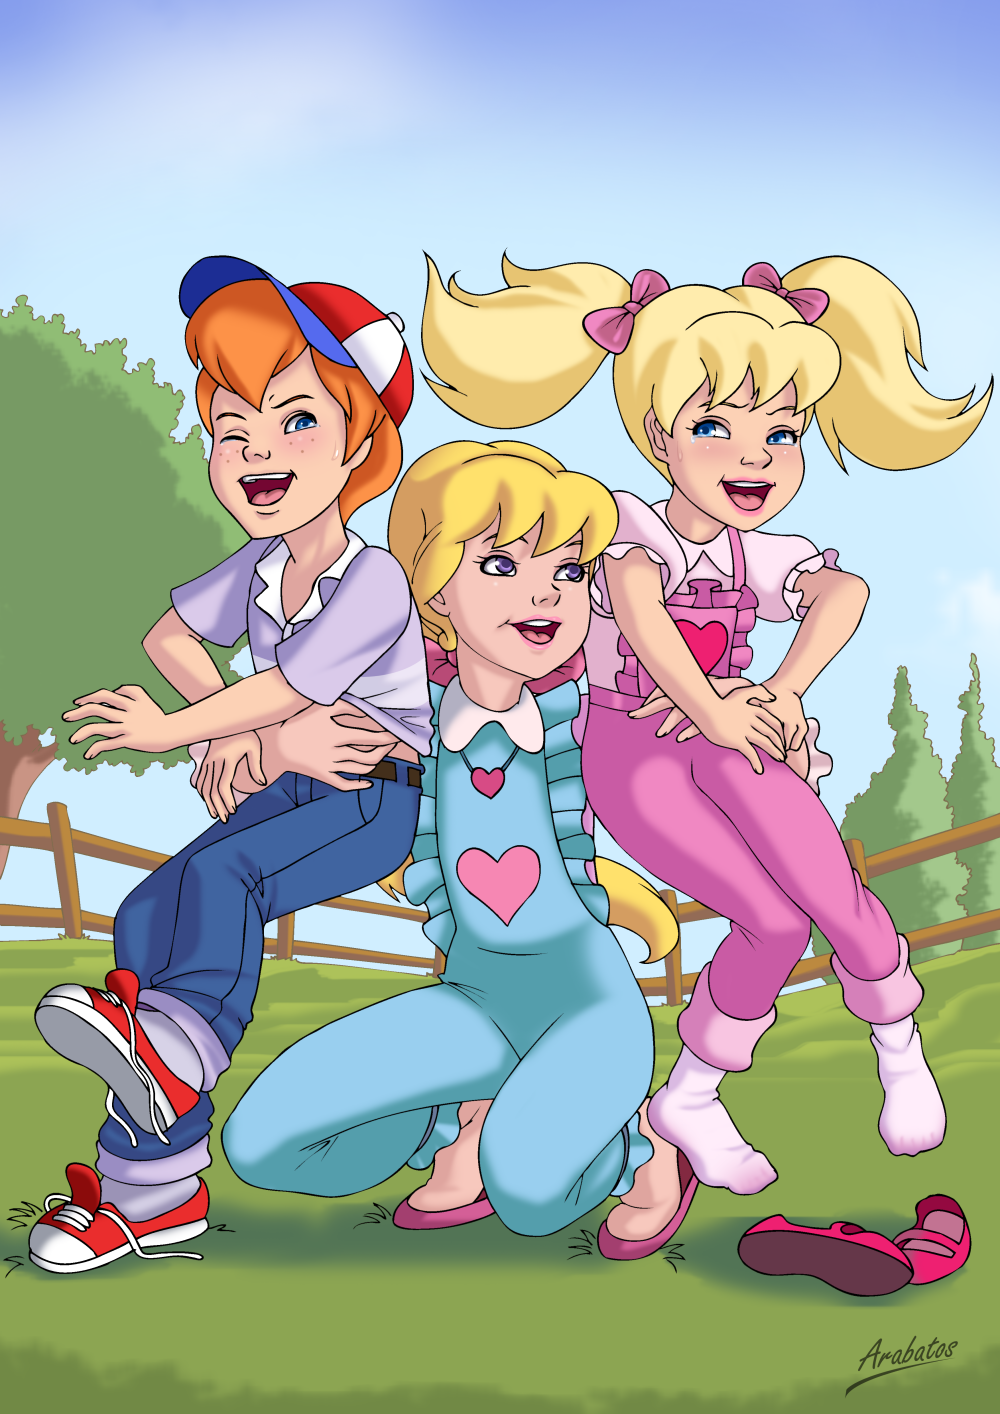 blonde_hair blue_eyes danny_williams hug laughing megan_williams molly_williams my_little_pony ponytail redhead smile tickle twintails violet_eyes